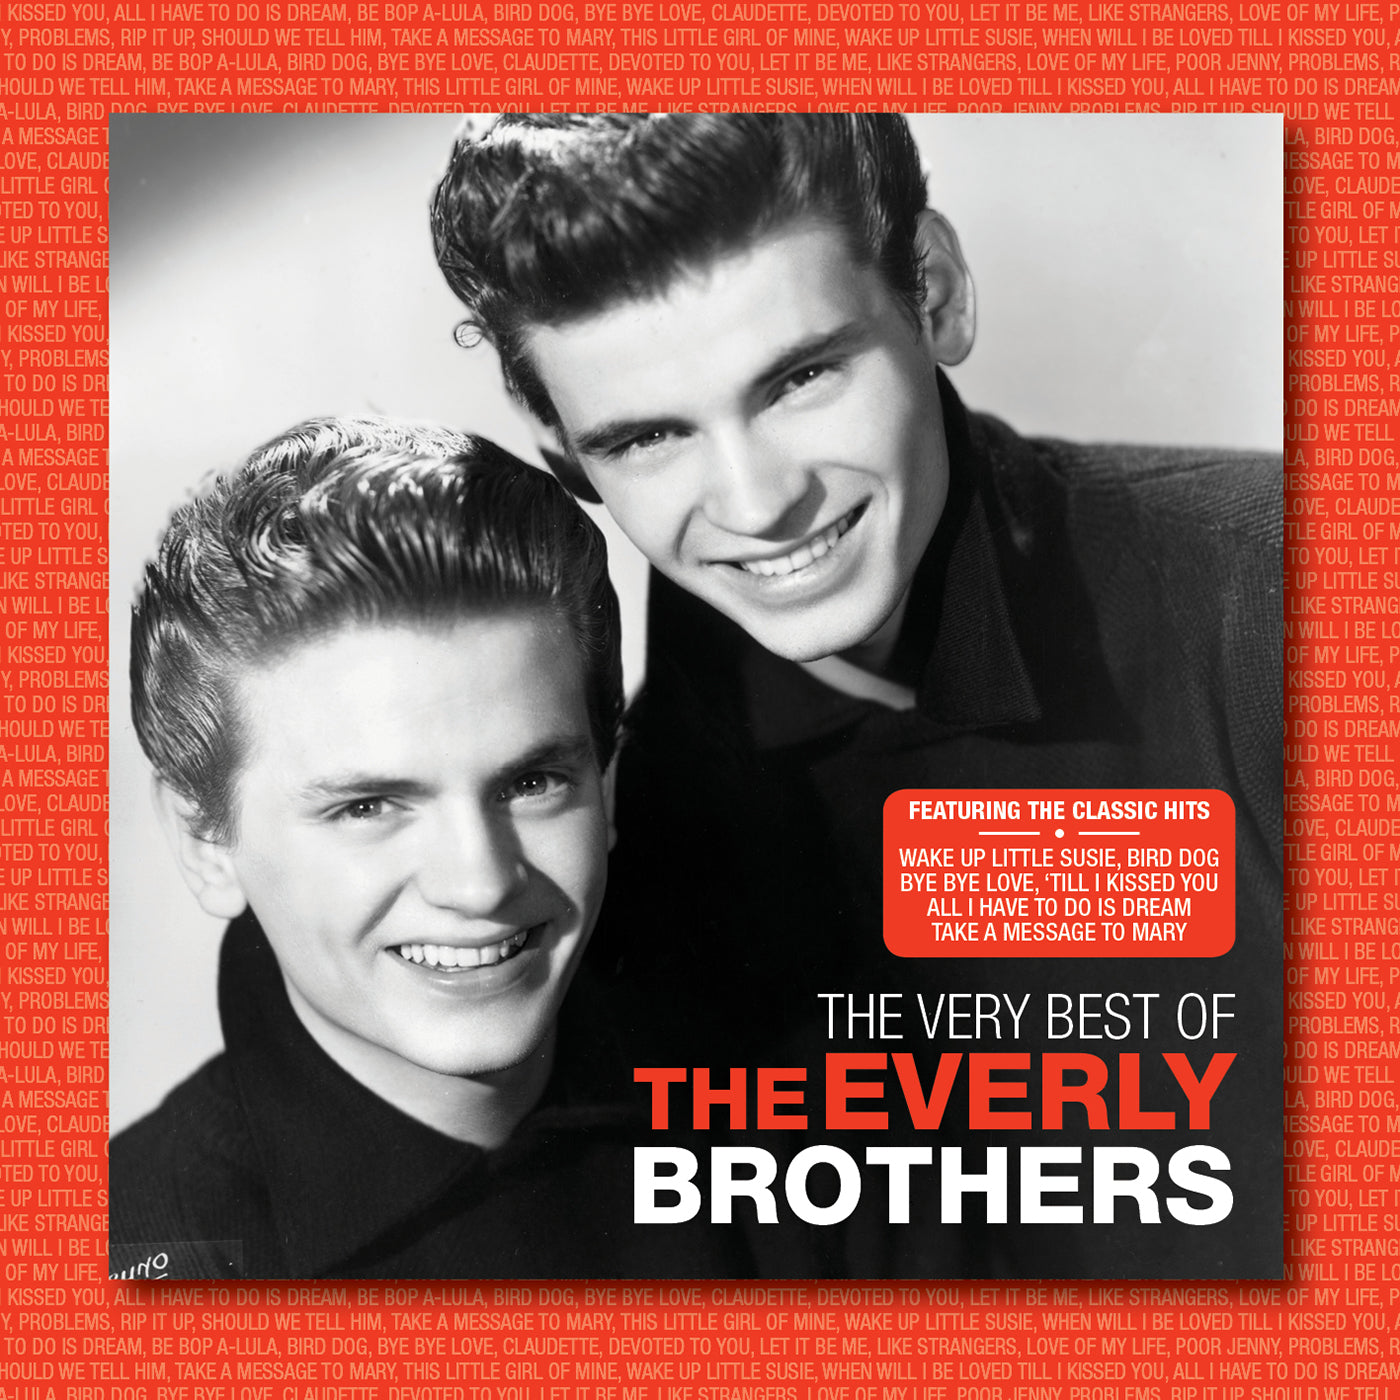 THE EVERLY BROTHERS - THE VERY BEST OF